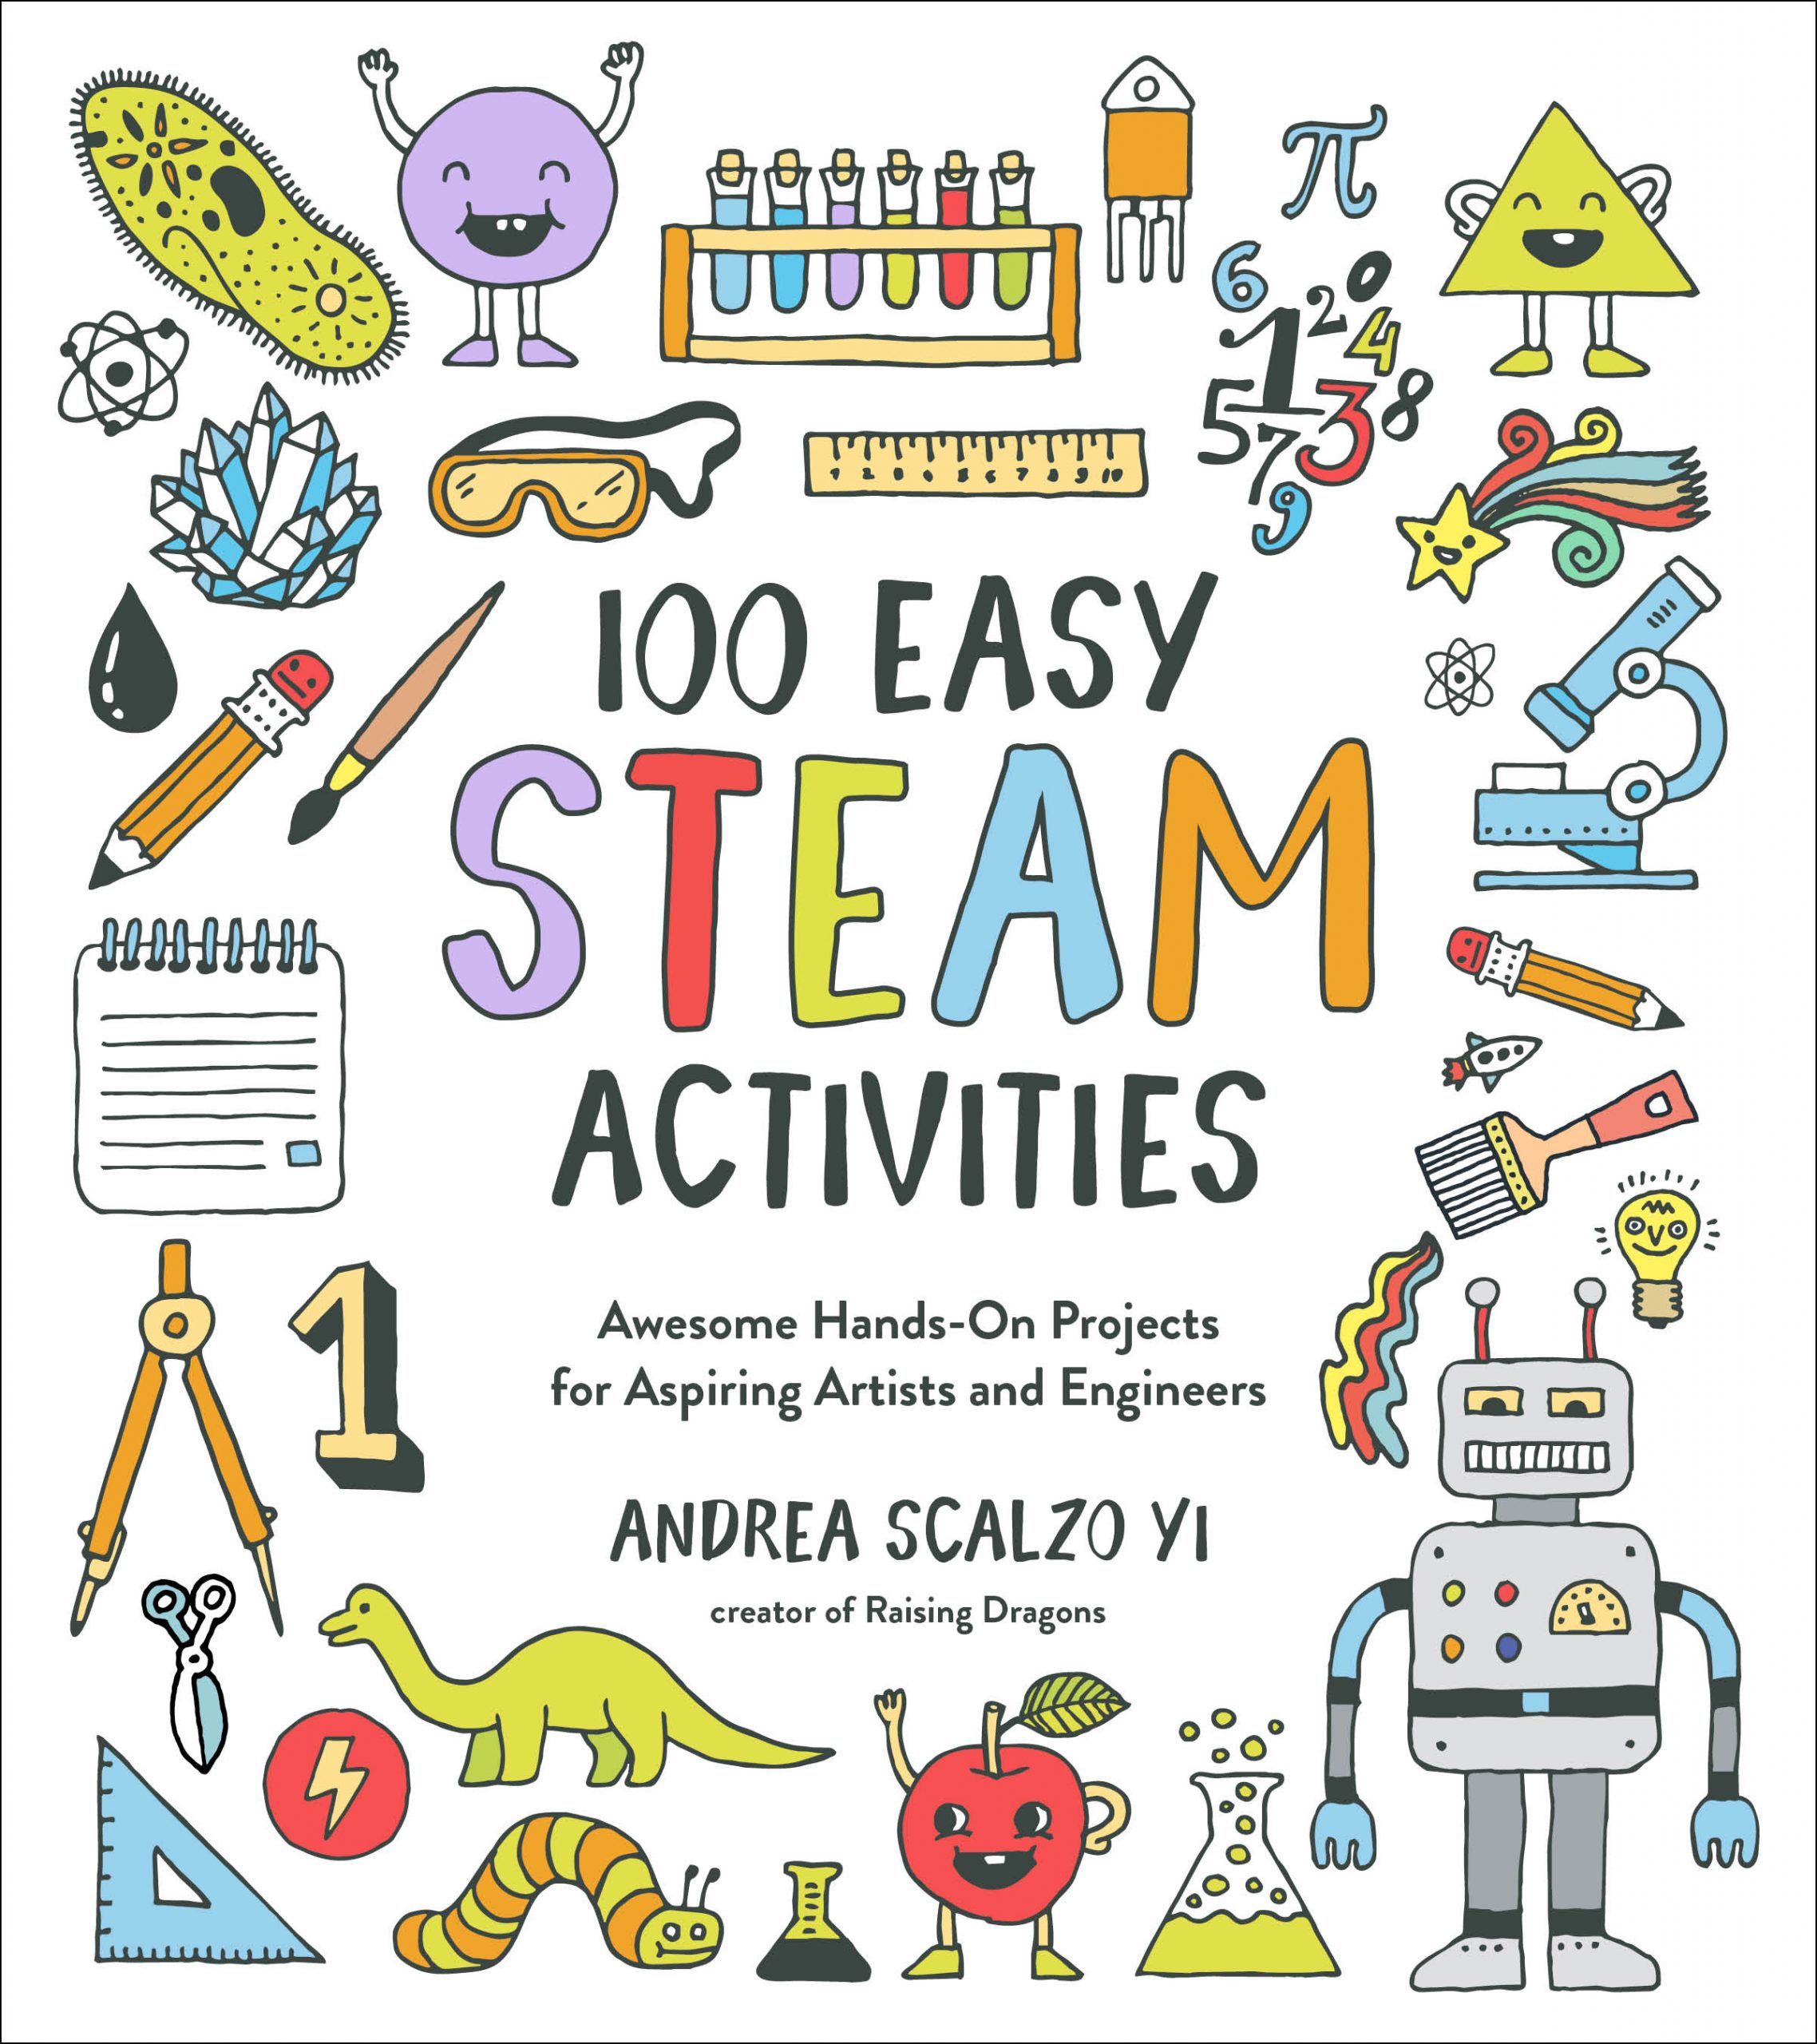 100 Easy Steam Activities book cover.